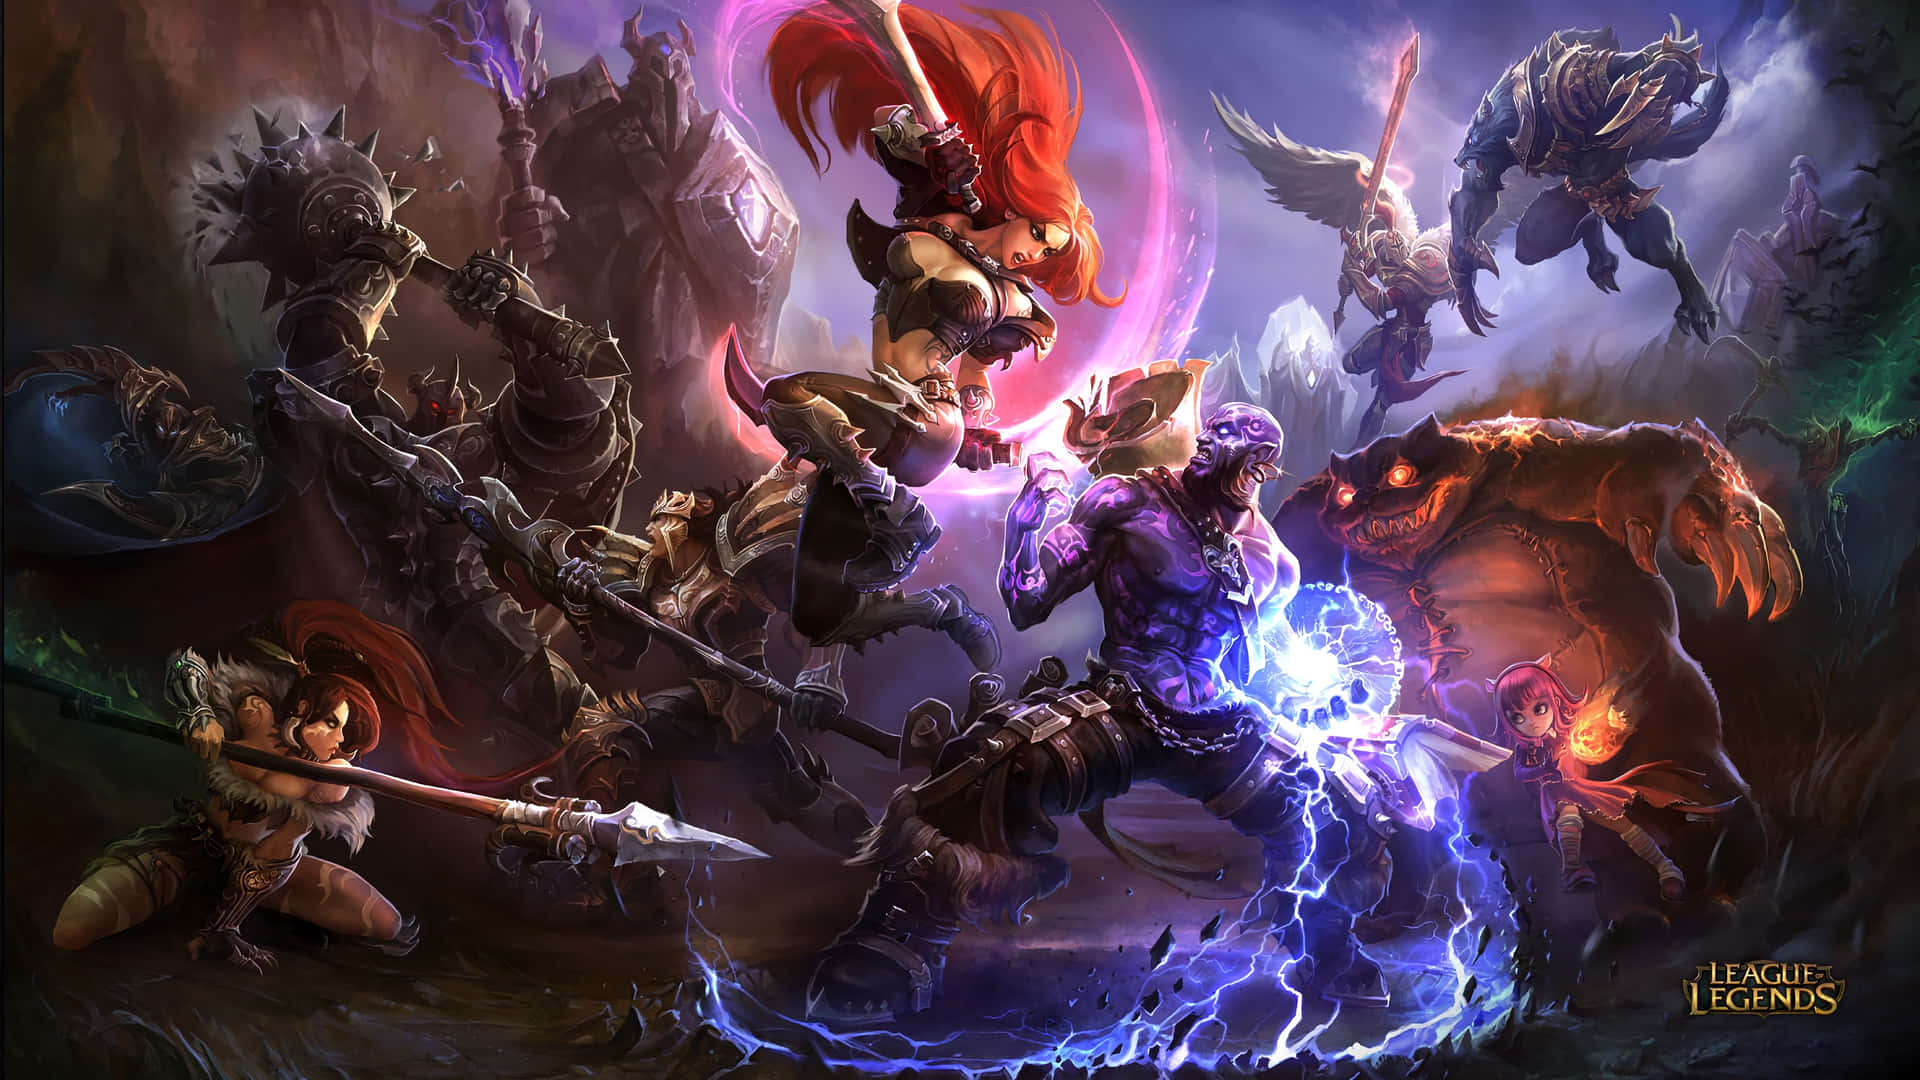 Unlock the power of the League Of Legends with a striking laptop Wallpaper